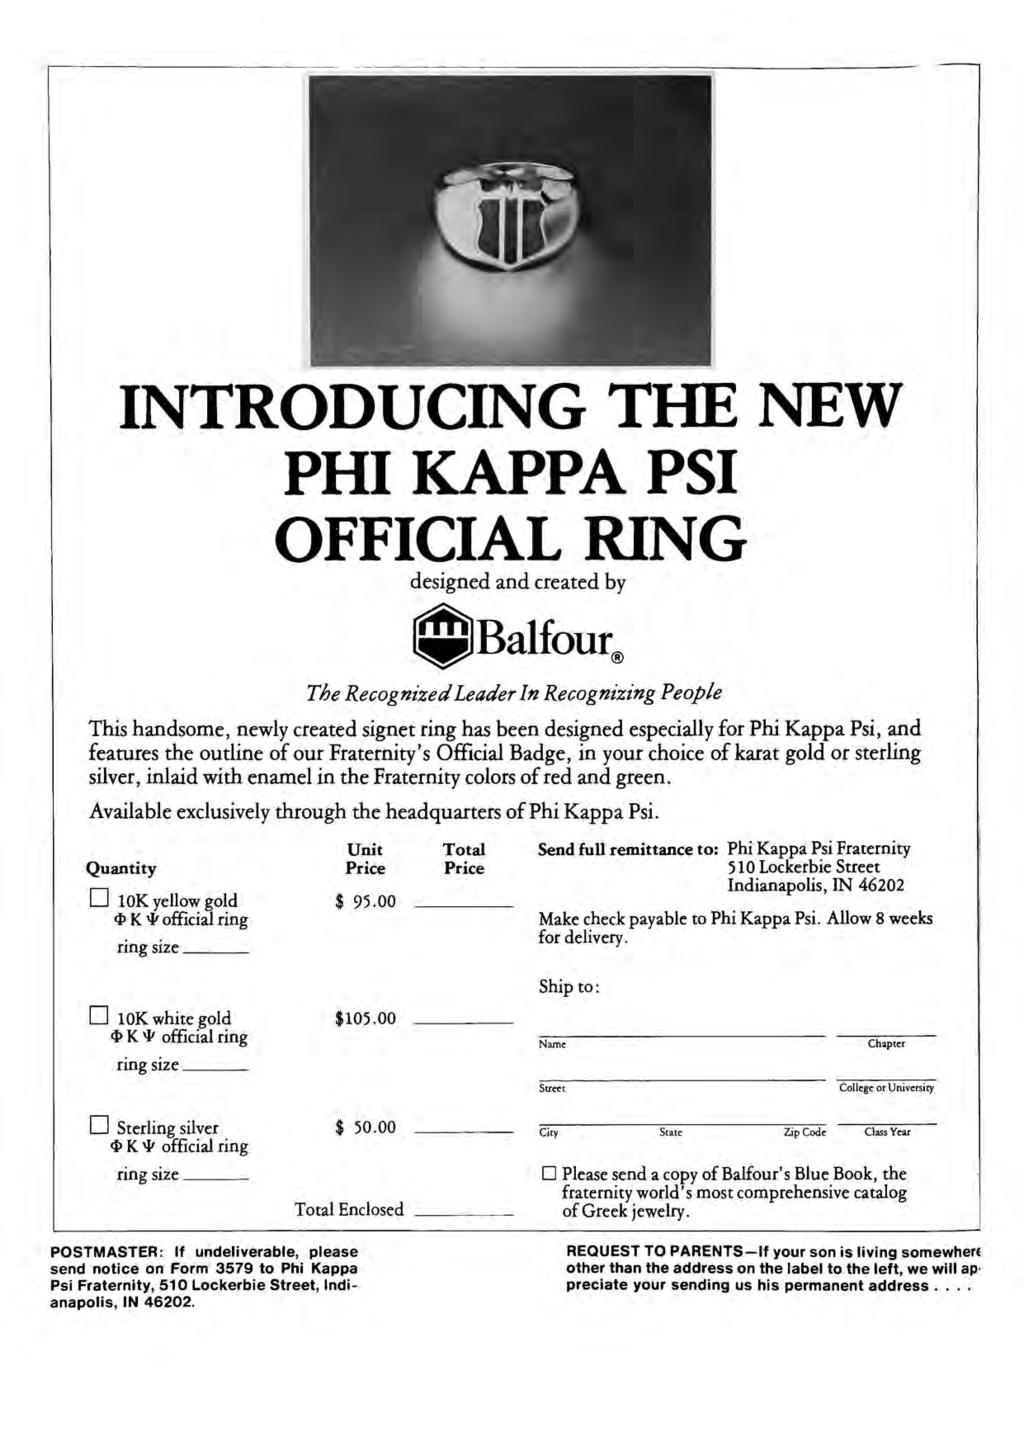 INTRODUCING THE NEW PHI KAPPA PSI OFFICIAL RING designed and created by Balfour^ The Recognized Leader In Recognizing People This handsome, newly created signet ring has been designed especially for